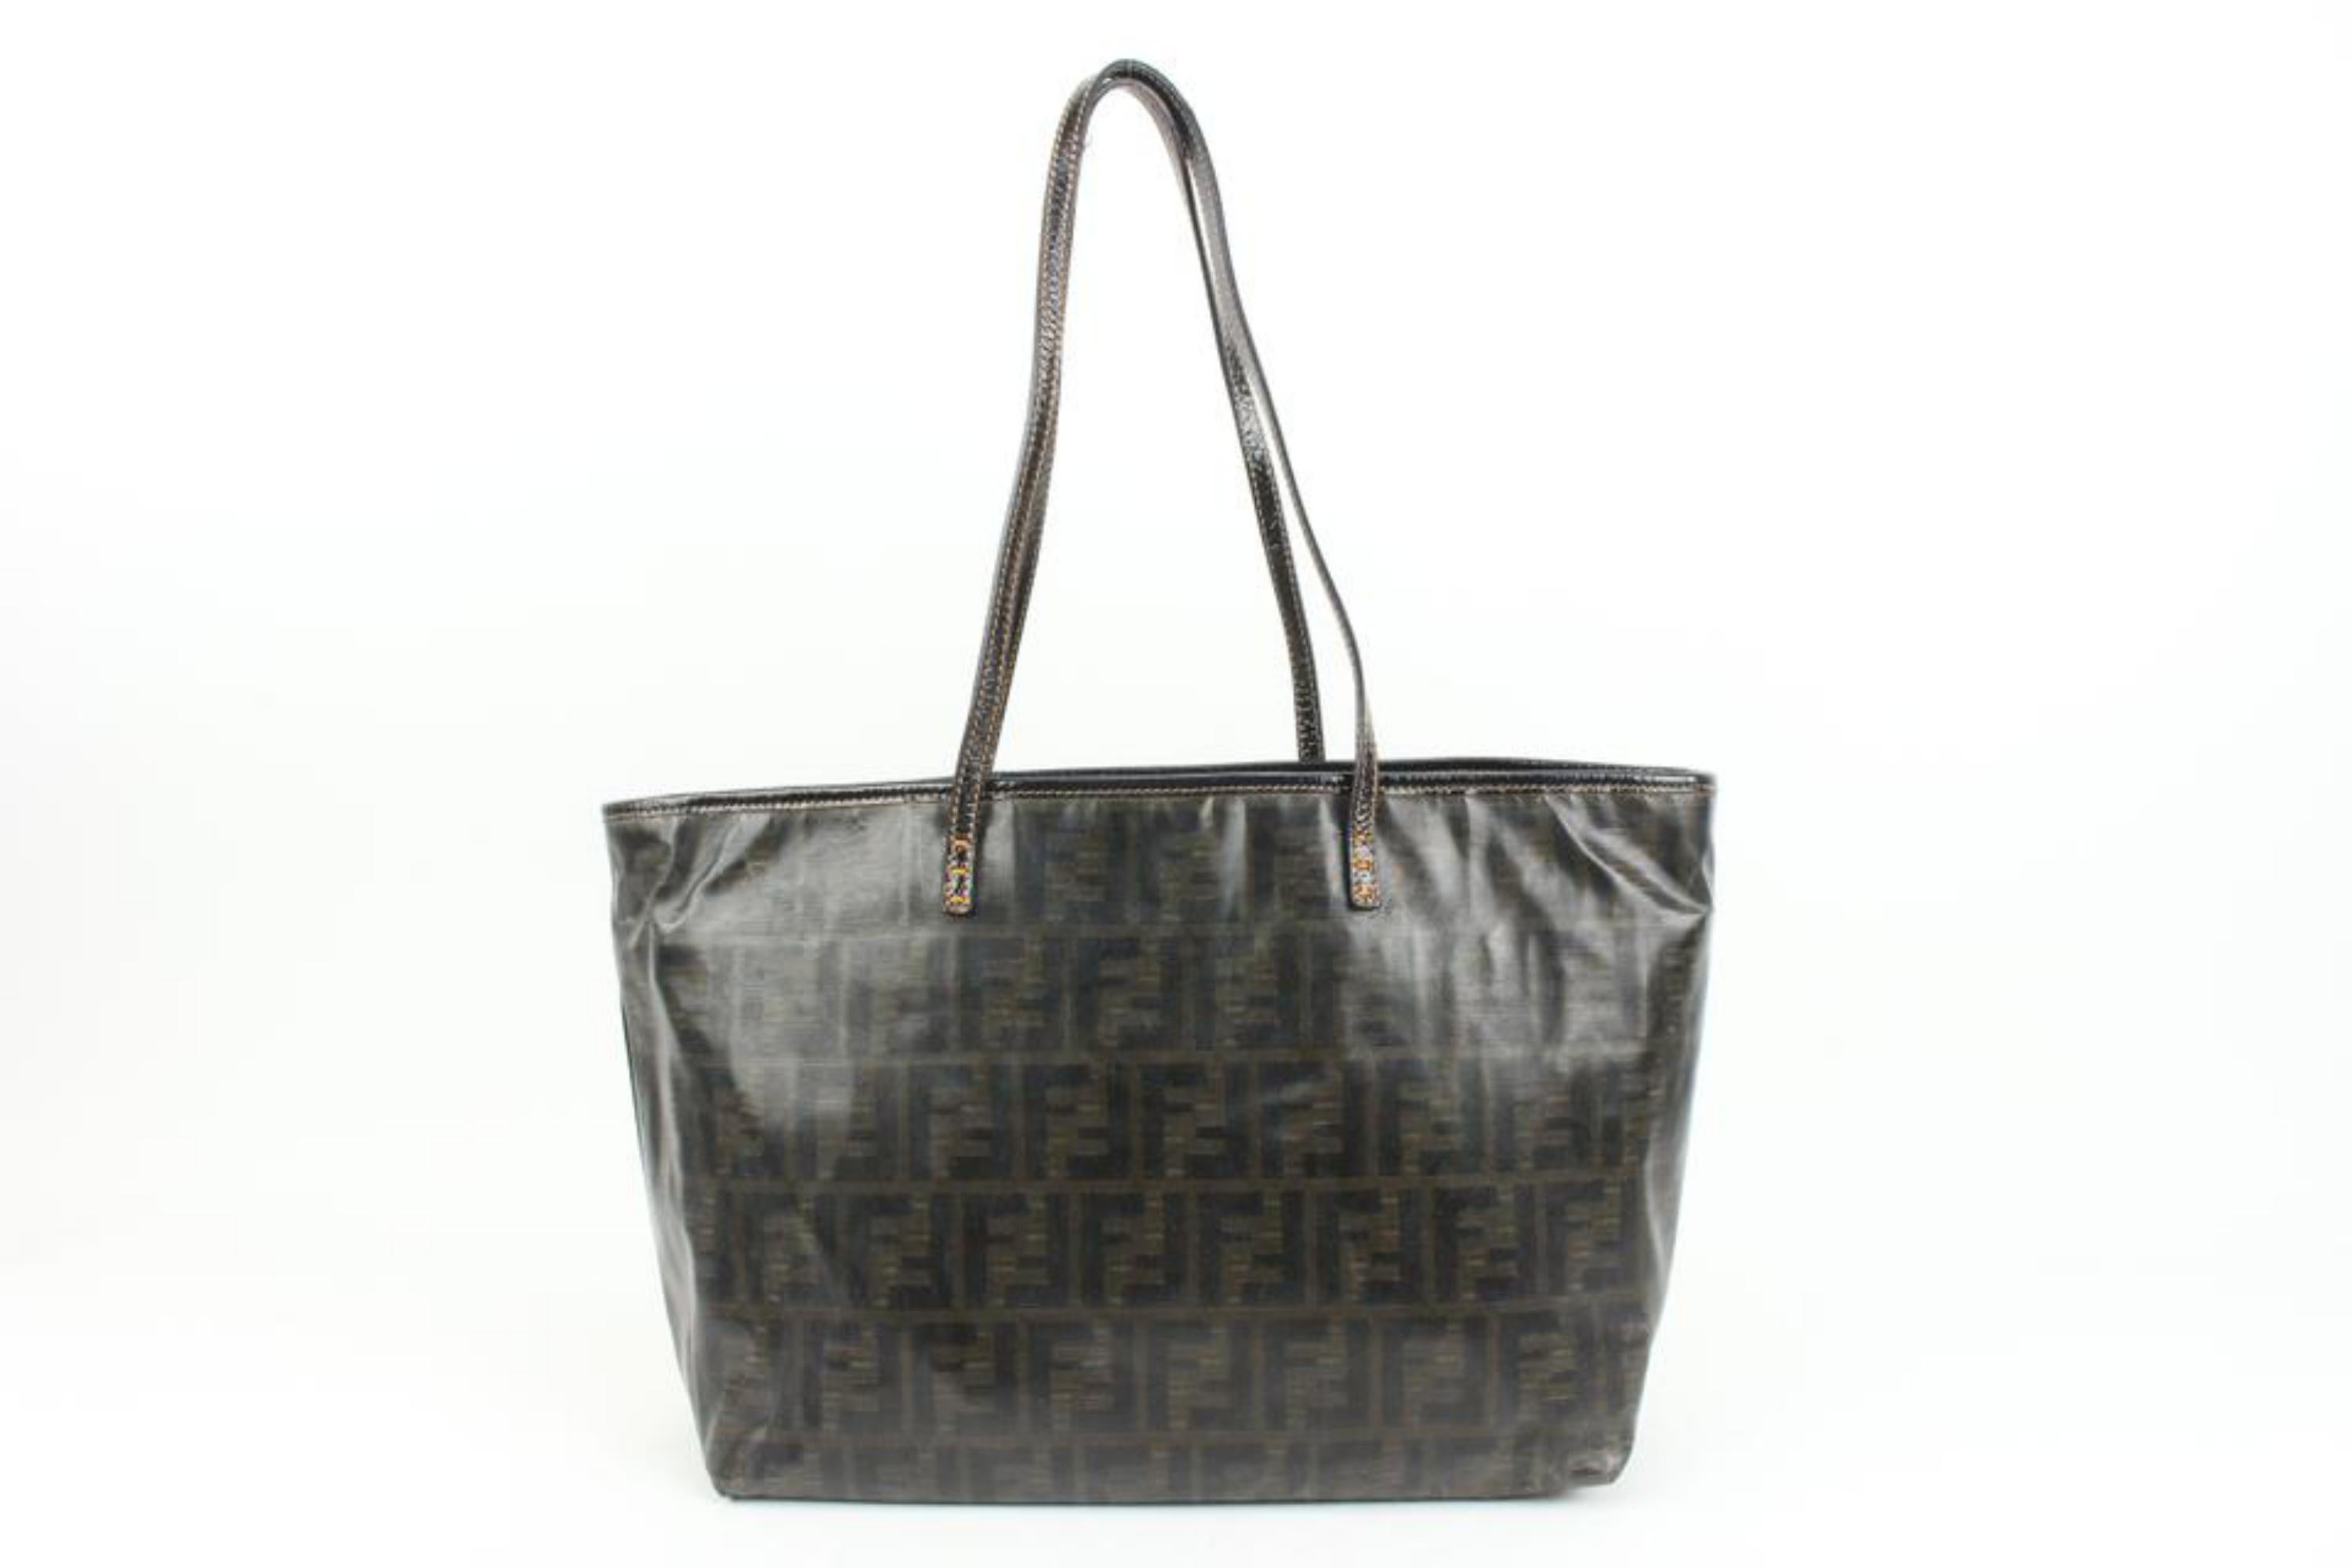 Fendi Brown Monogram FF Zucca Roll Tote Shopper Bag 44f89
Date Code/Serial Number: 2241-8BH192-WTE-079
Made In: Italy
Measurements: Length:  17